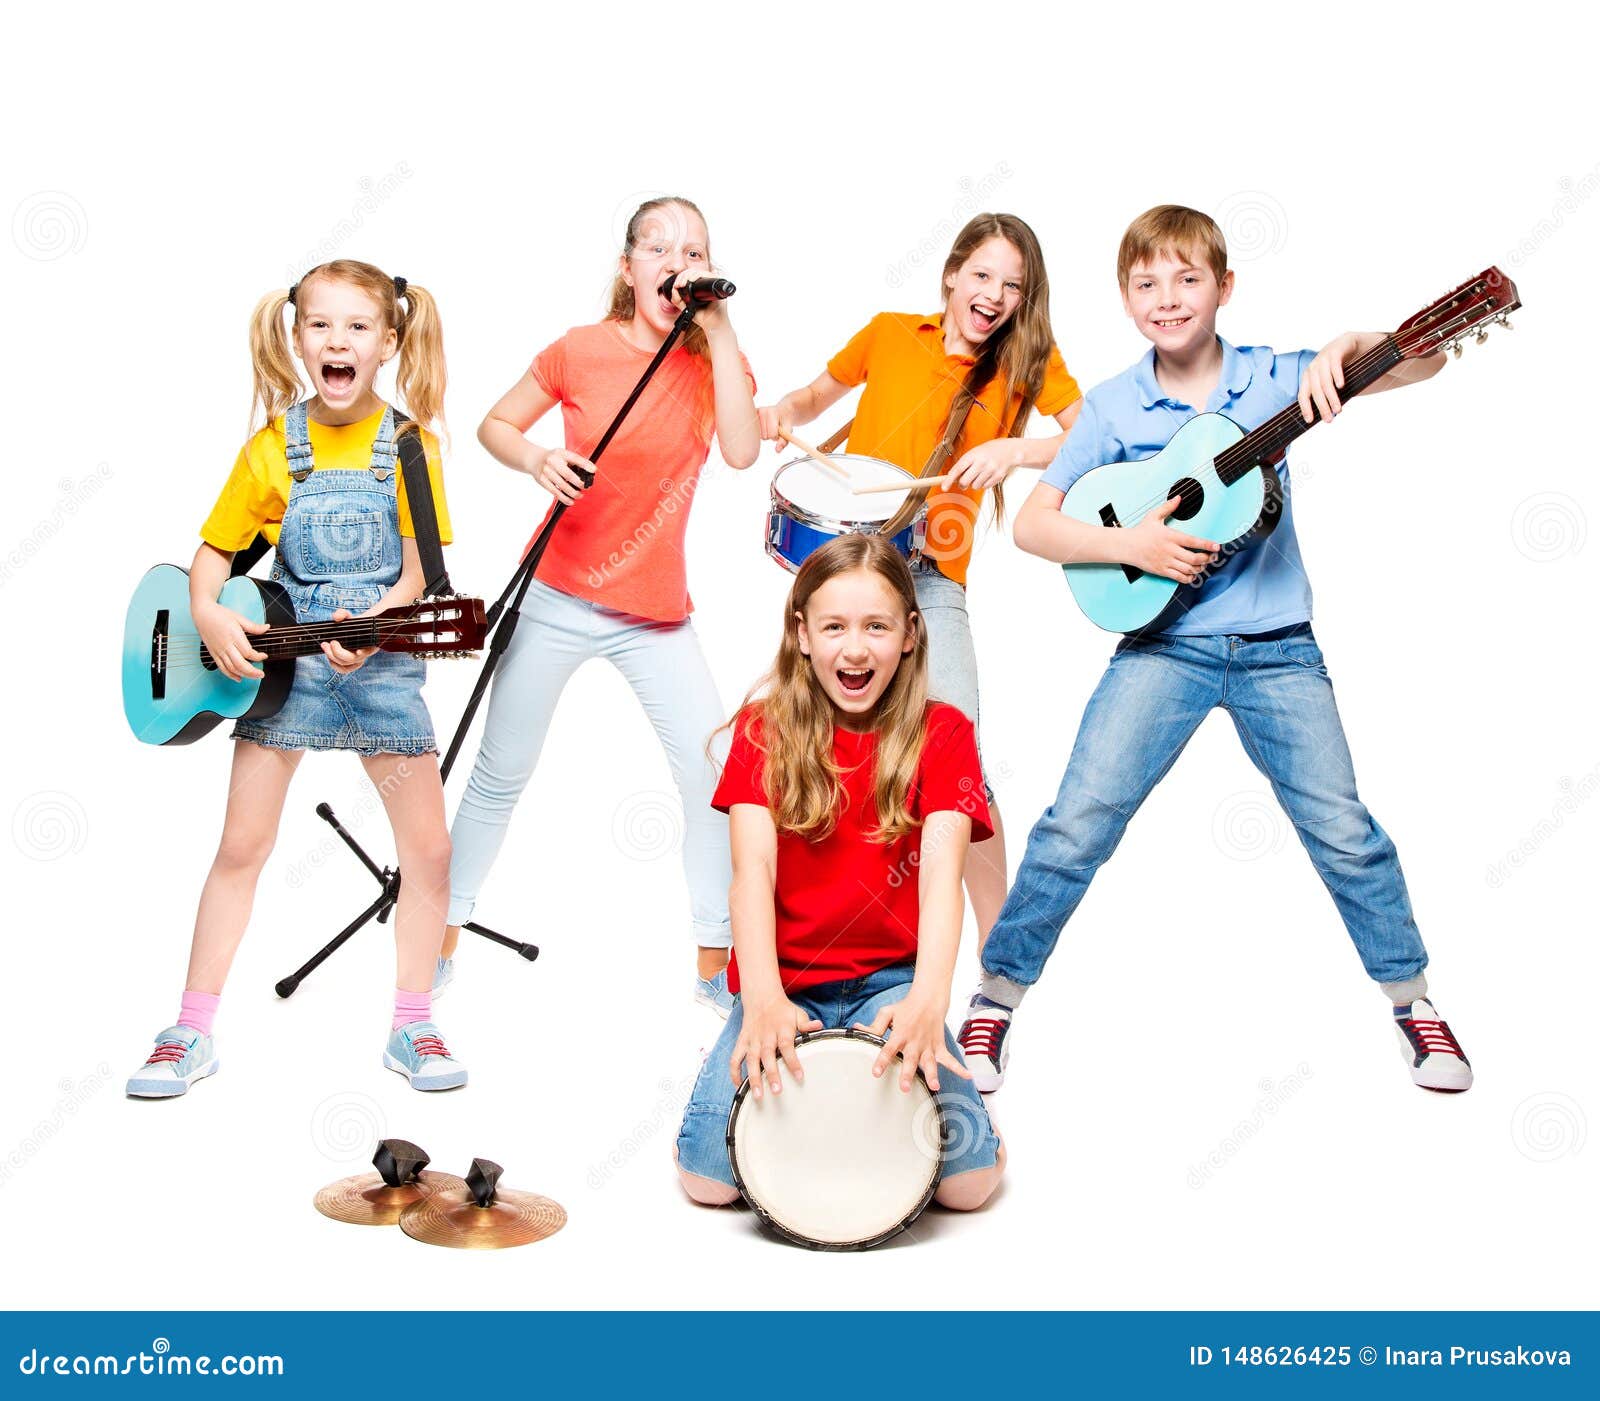 children group playing on music instruments, kids musical band on white